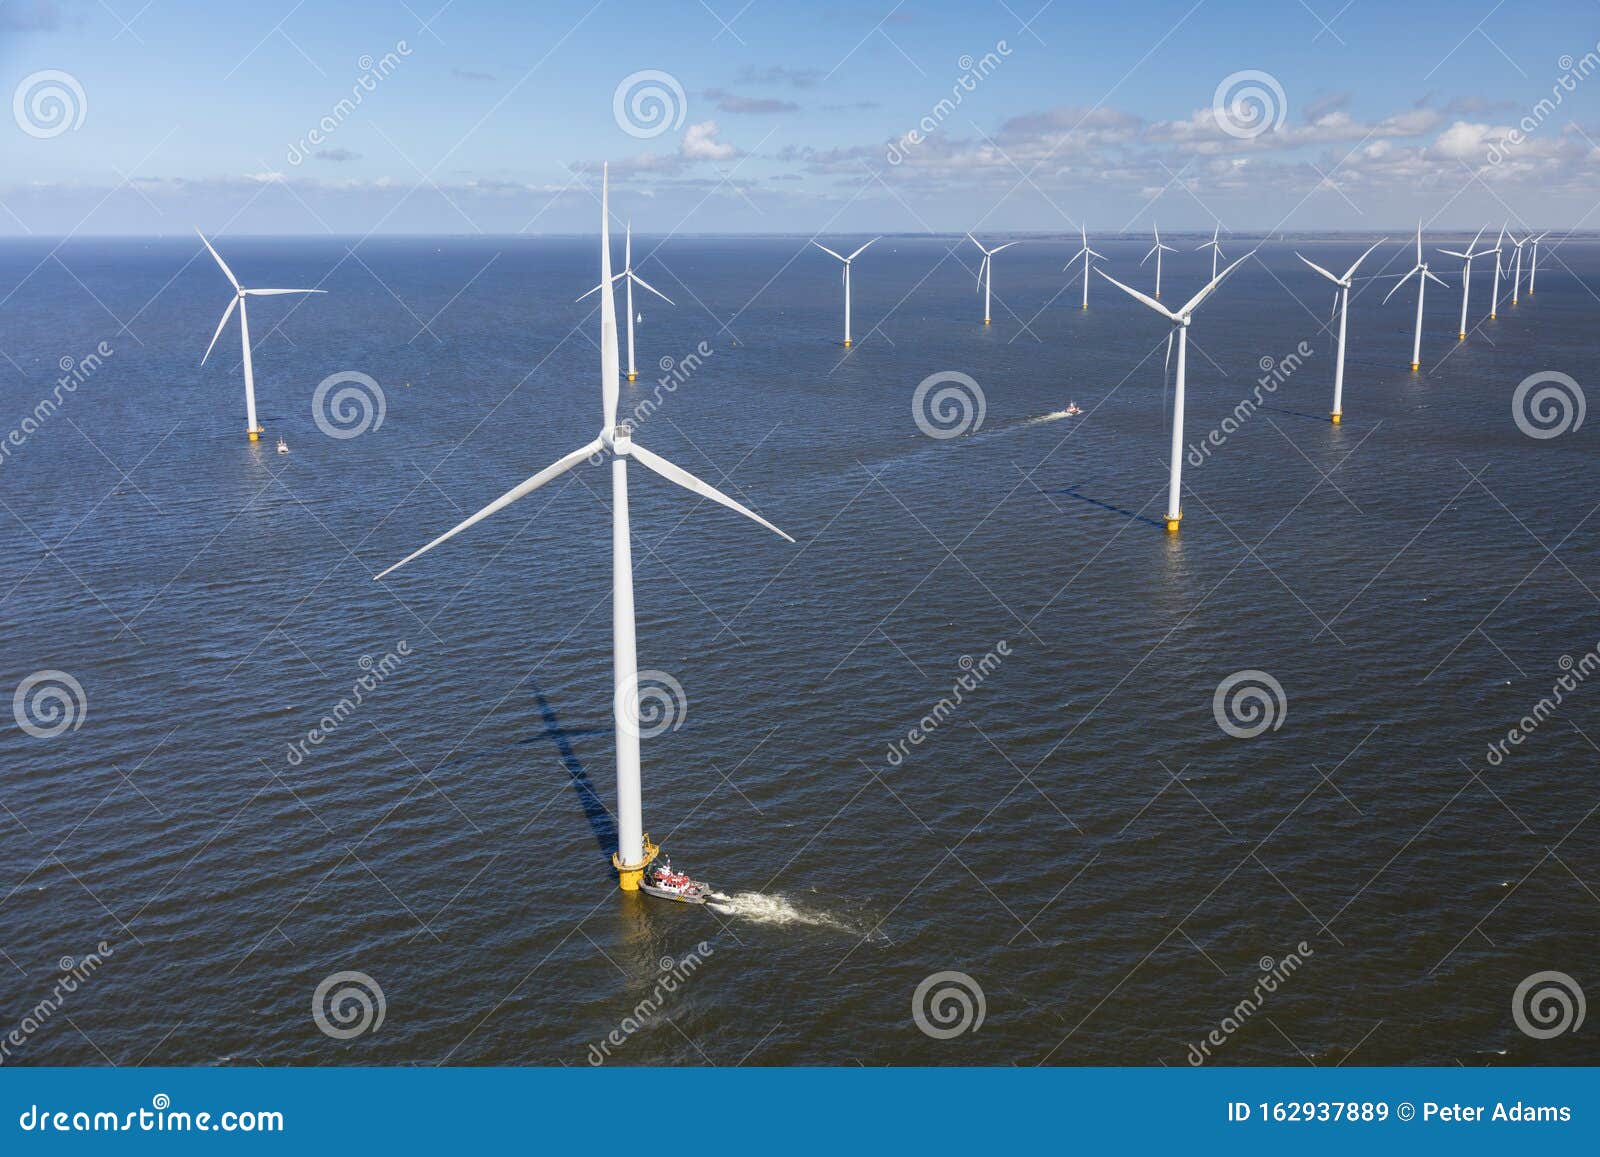 aerial view of wind turbines at sea, north holland